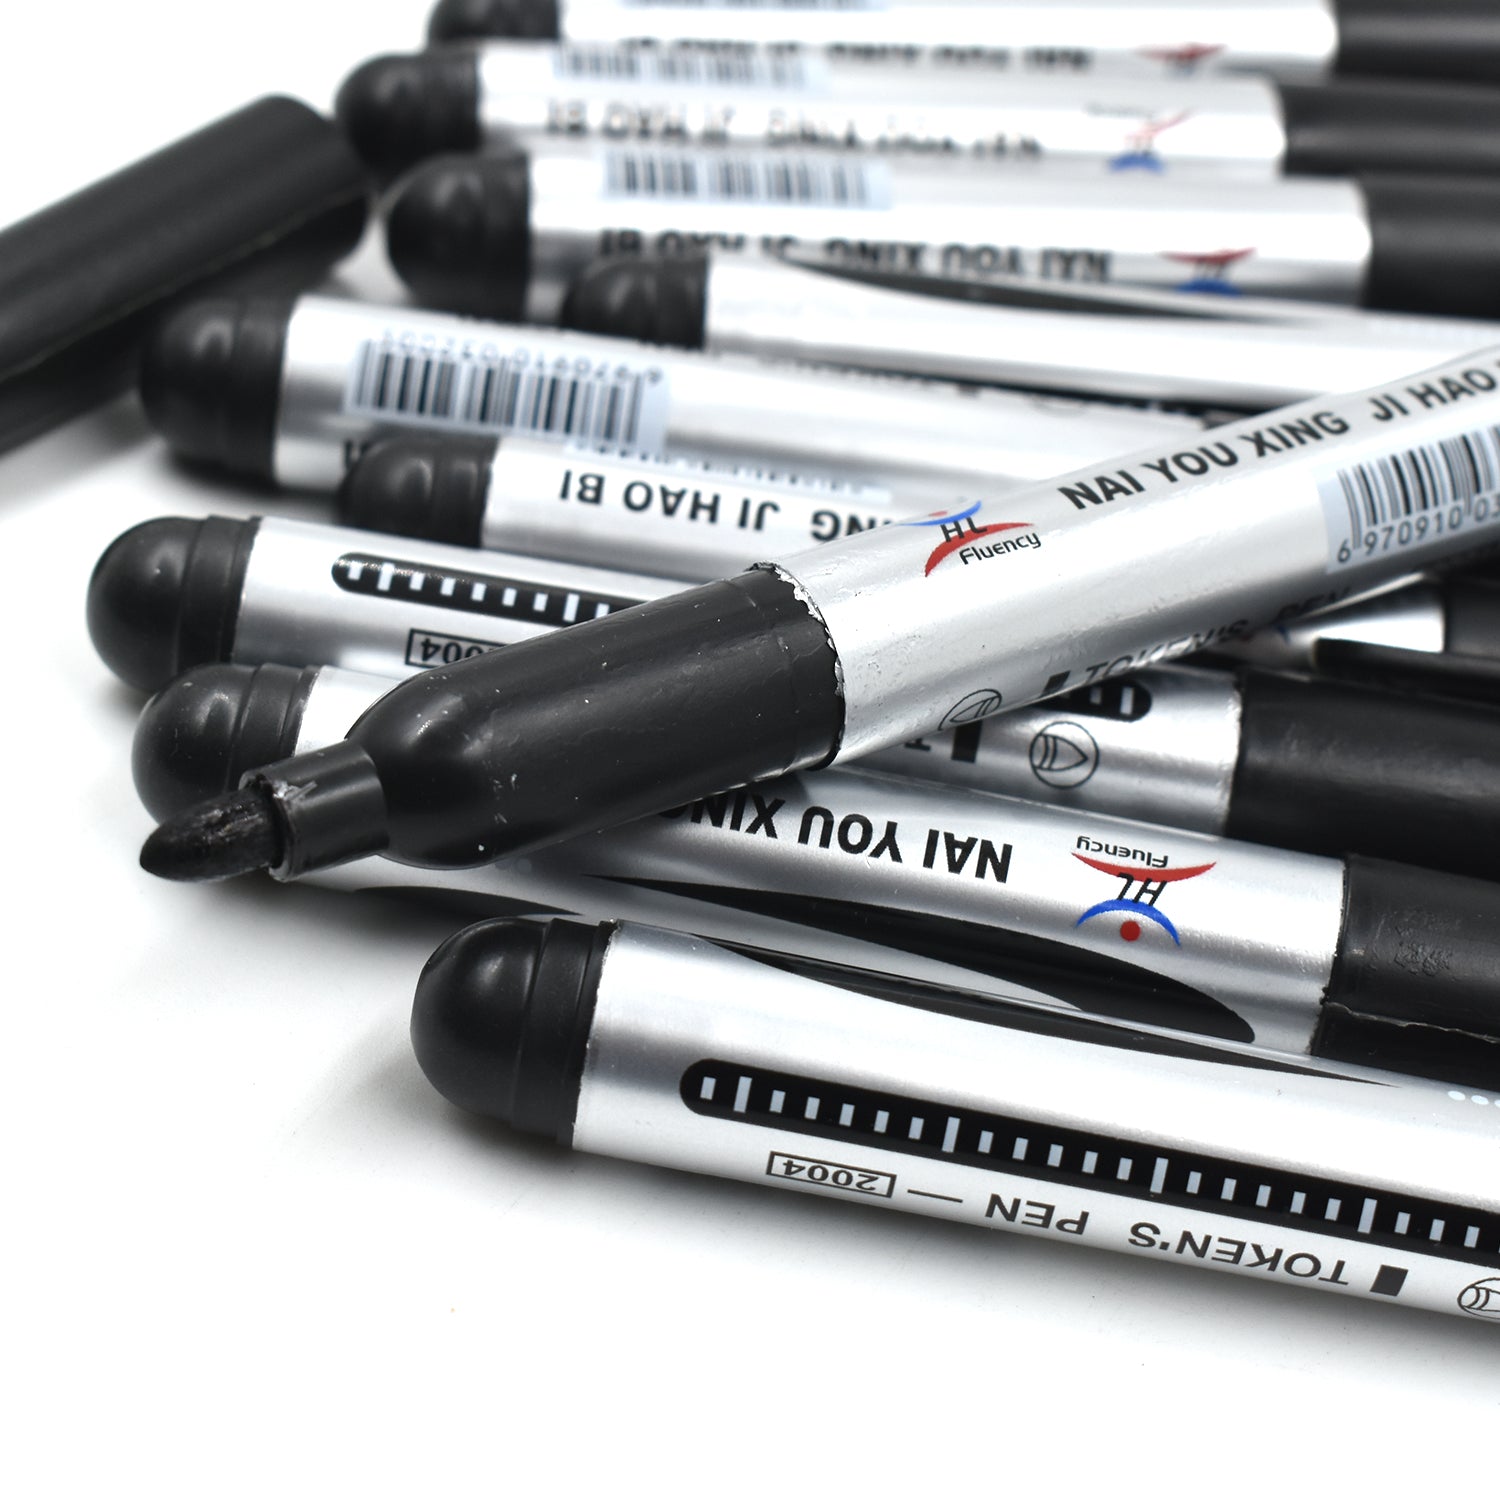 9018 10 Pc Black Marker used in all kinds of school, college and official places for studies and teaching among the students.